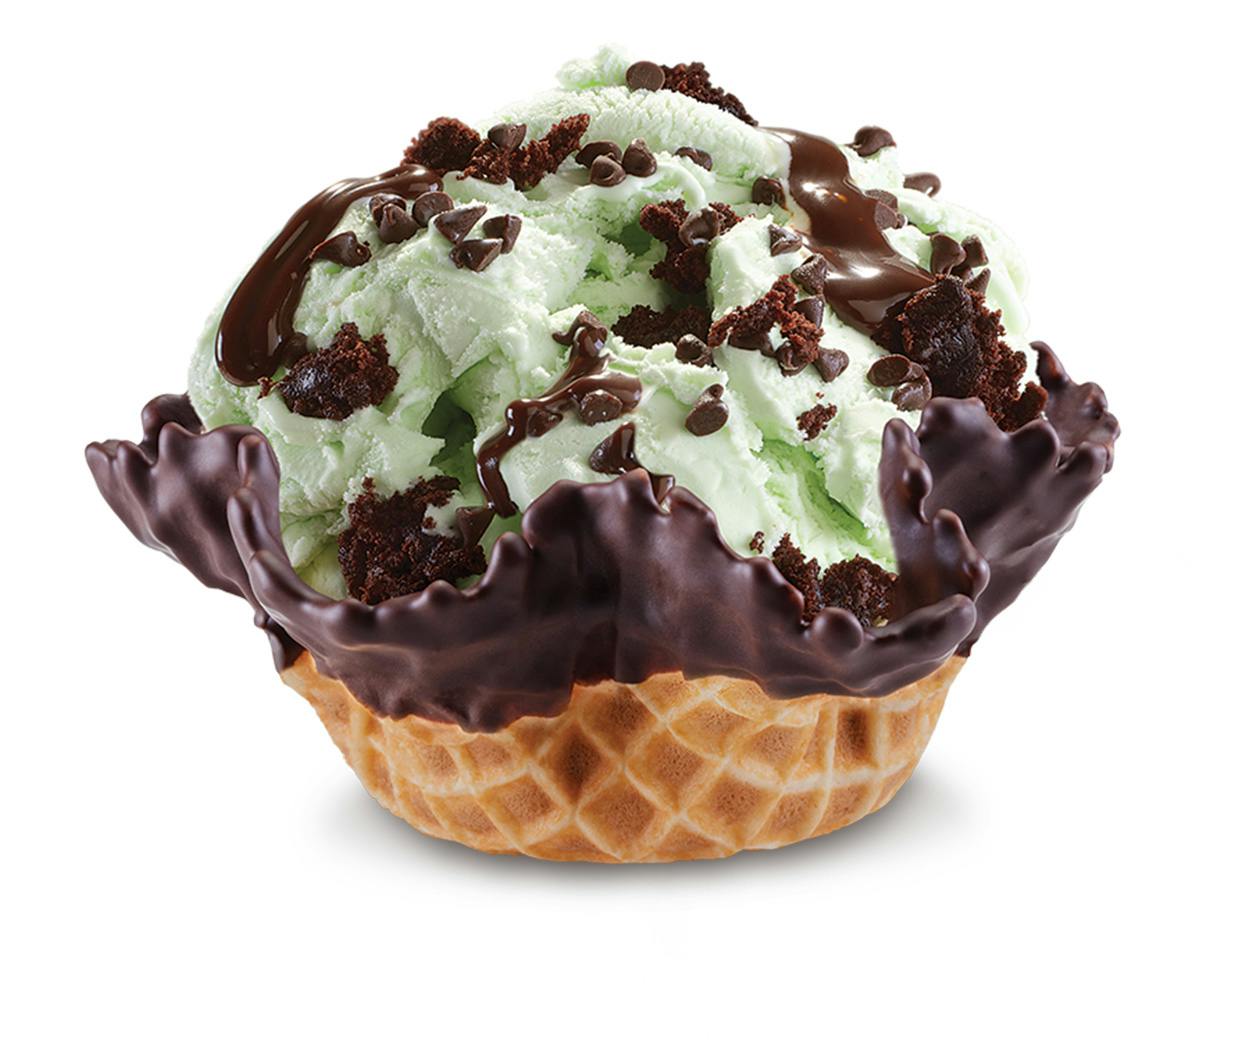 Mint Mint Chocolate Chip from Cold Stone Creamery - Green Bay in Green Bay, WI